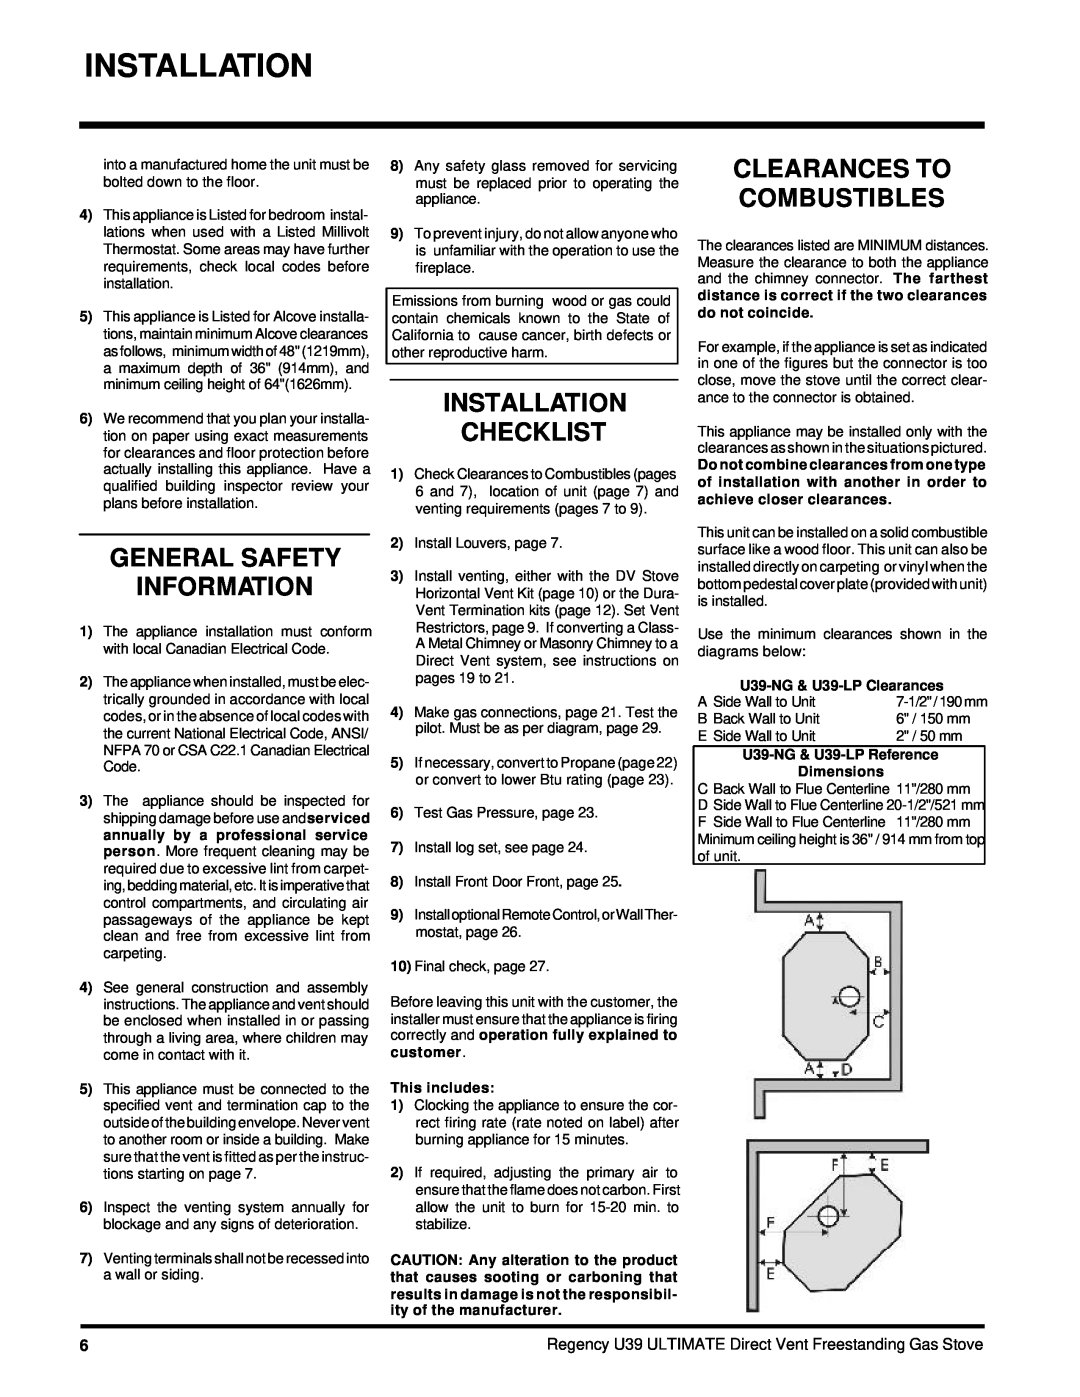 Regency U39-LP, U39-NG General Safety Information, Installation Checklist, Clearances To Combustibles, This includes 